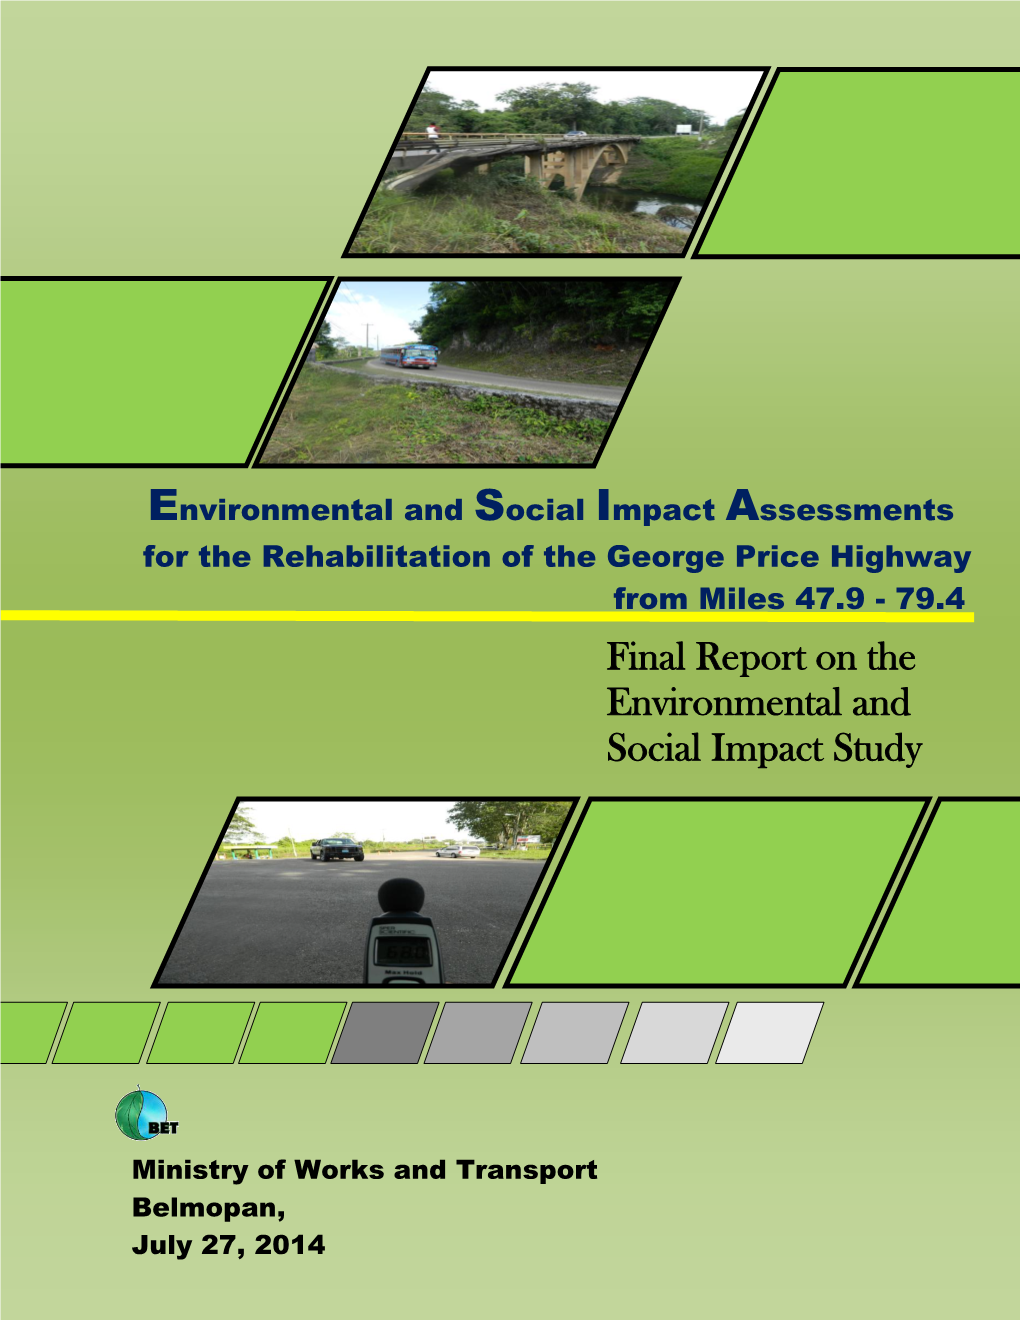 Final Report on the Environmental and Social Impact Study